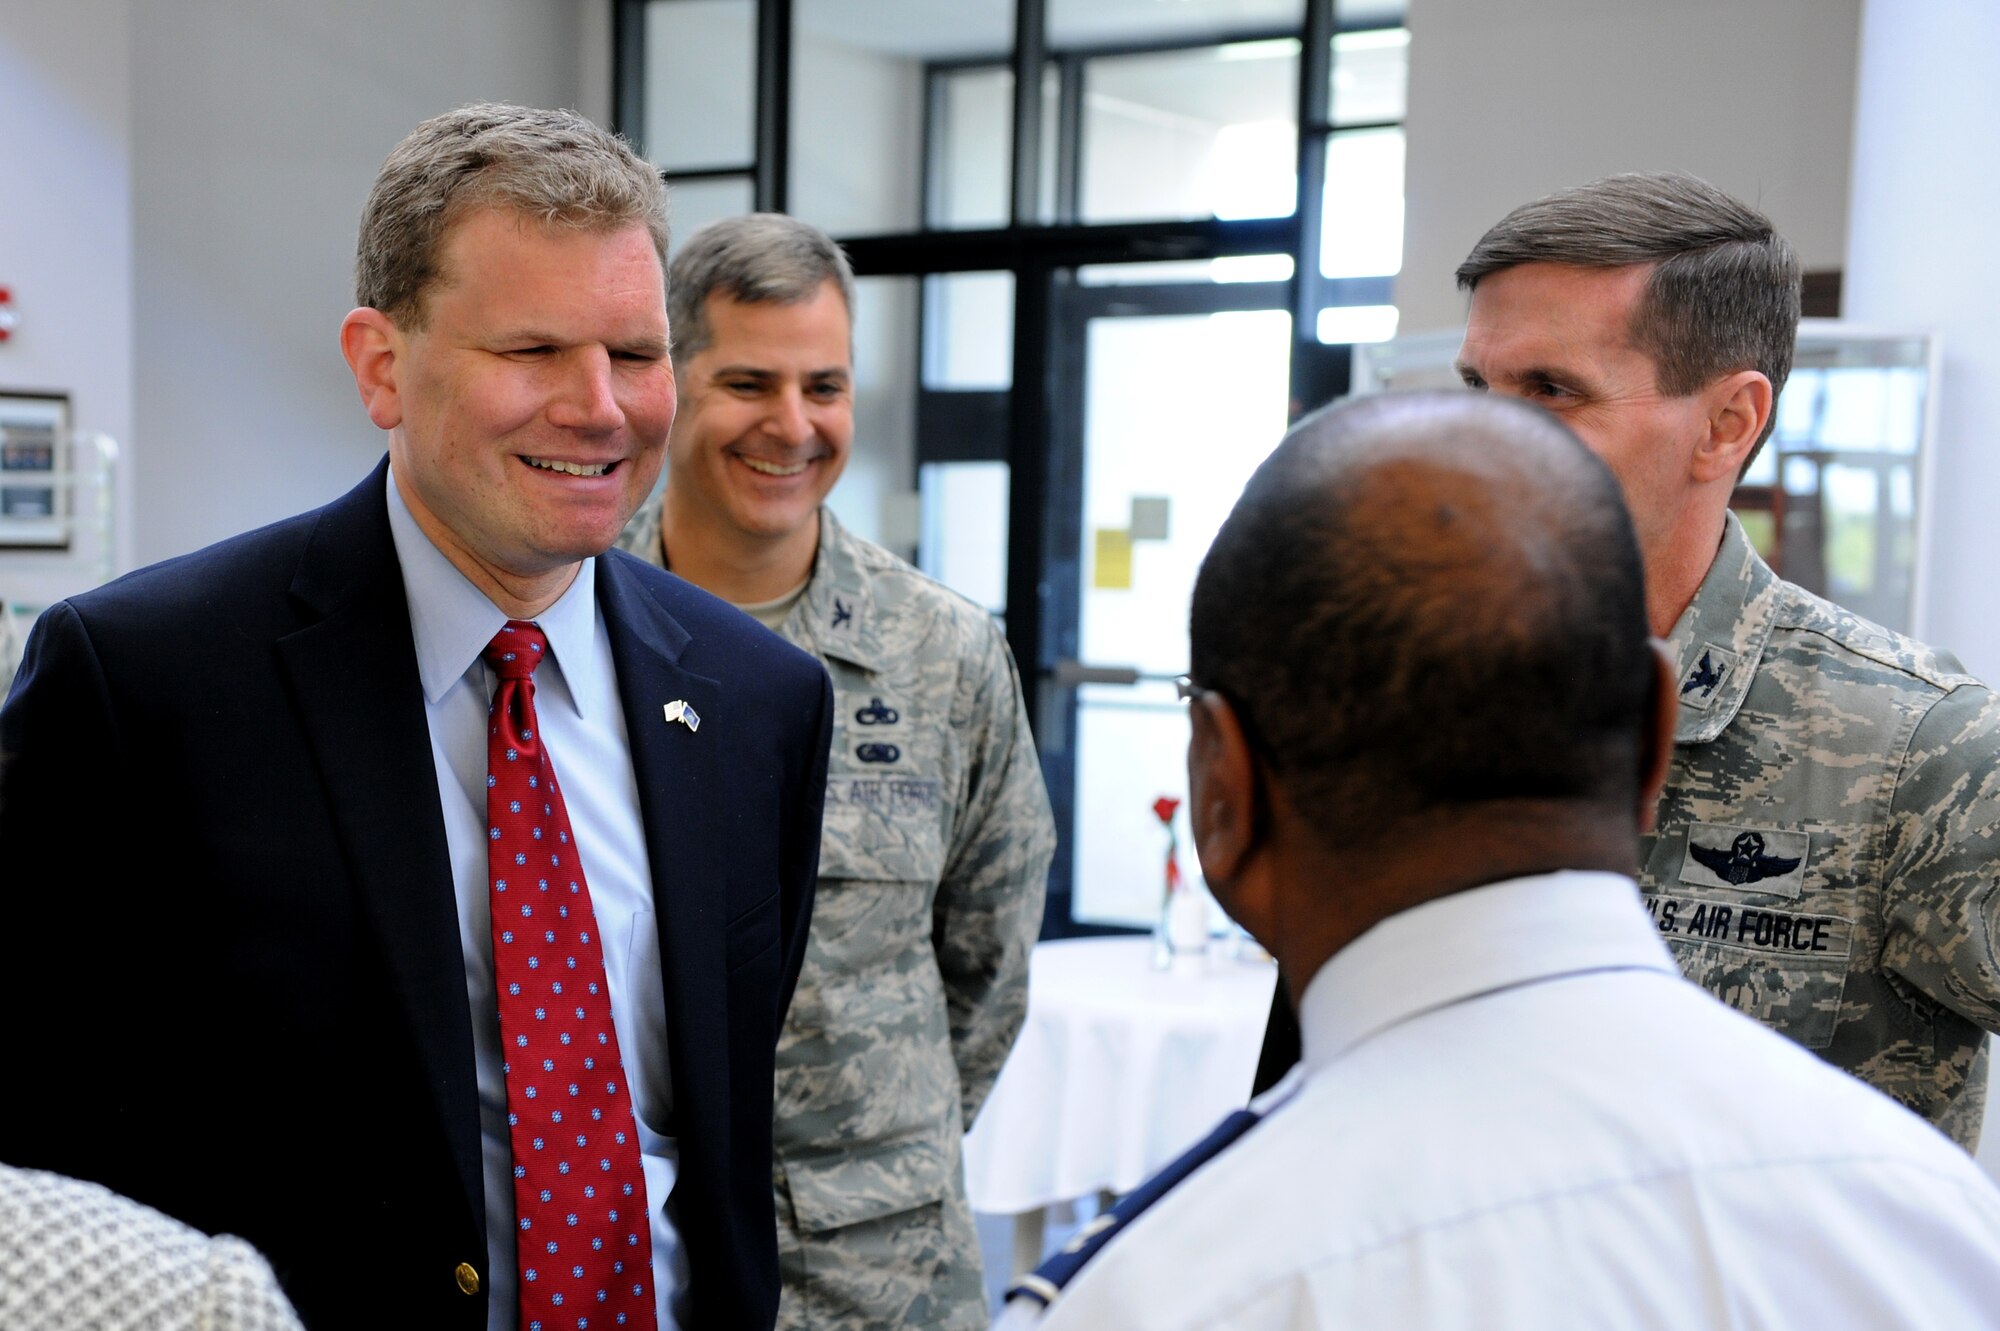 U.S. Rep. Dan Maffei (NY-24) talks with retiring Col. Wenzell Carter during the congressman's visit to Hancock Field Air National Guard Base on Saturday May 4, 2013.  Rep. Maffei spent time at the dining facility eating with members of the 174th Attack Wing. (New York Air National Guard photo by Tech. Sgt. Justin A. Huett/Released)